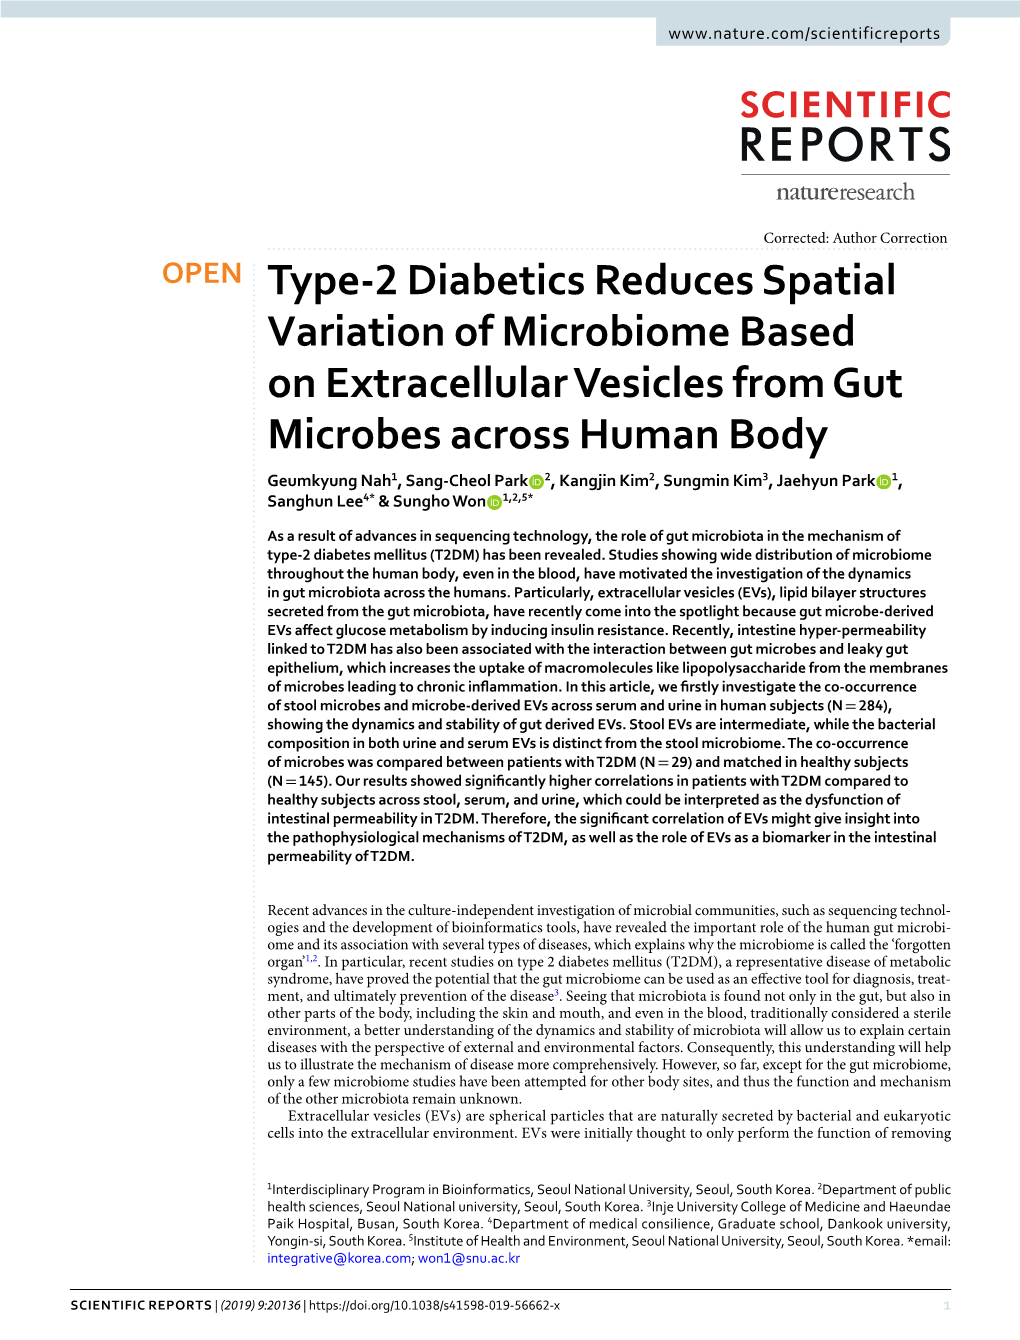 Type-2 Diabetics Reduces Spatial Variation of Microbiome Based On